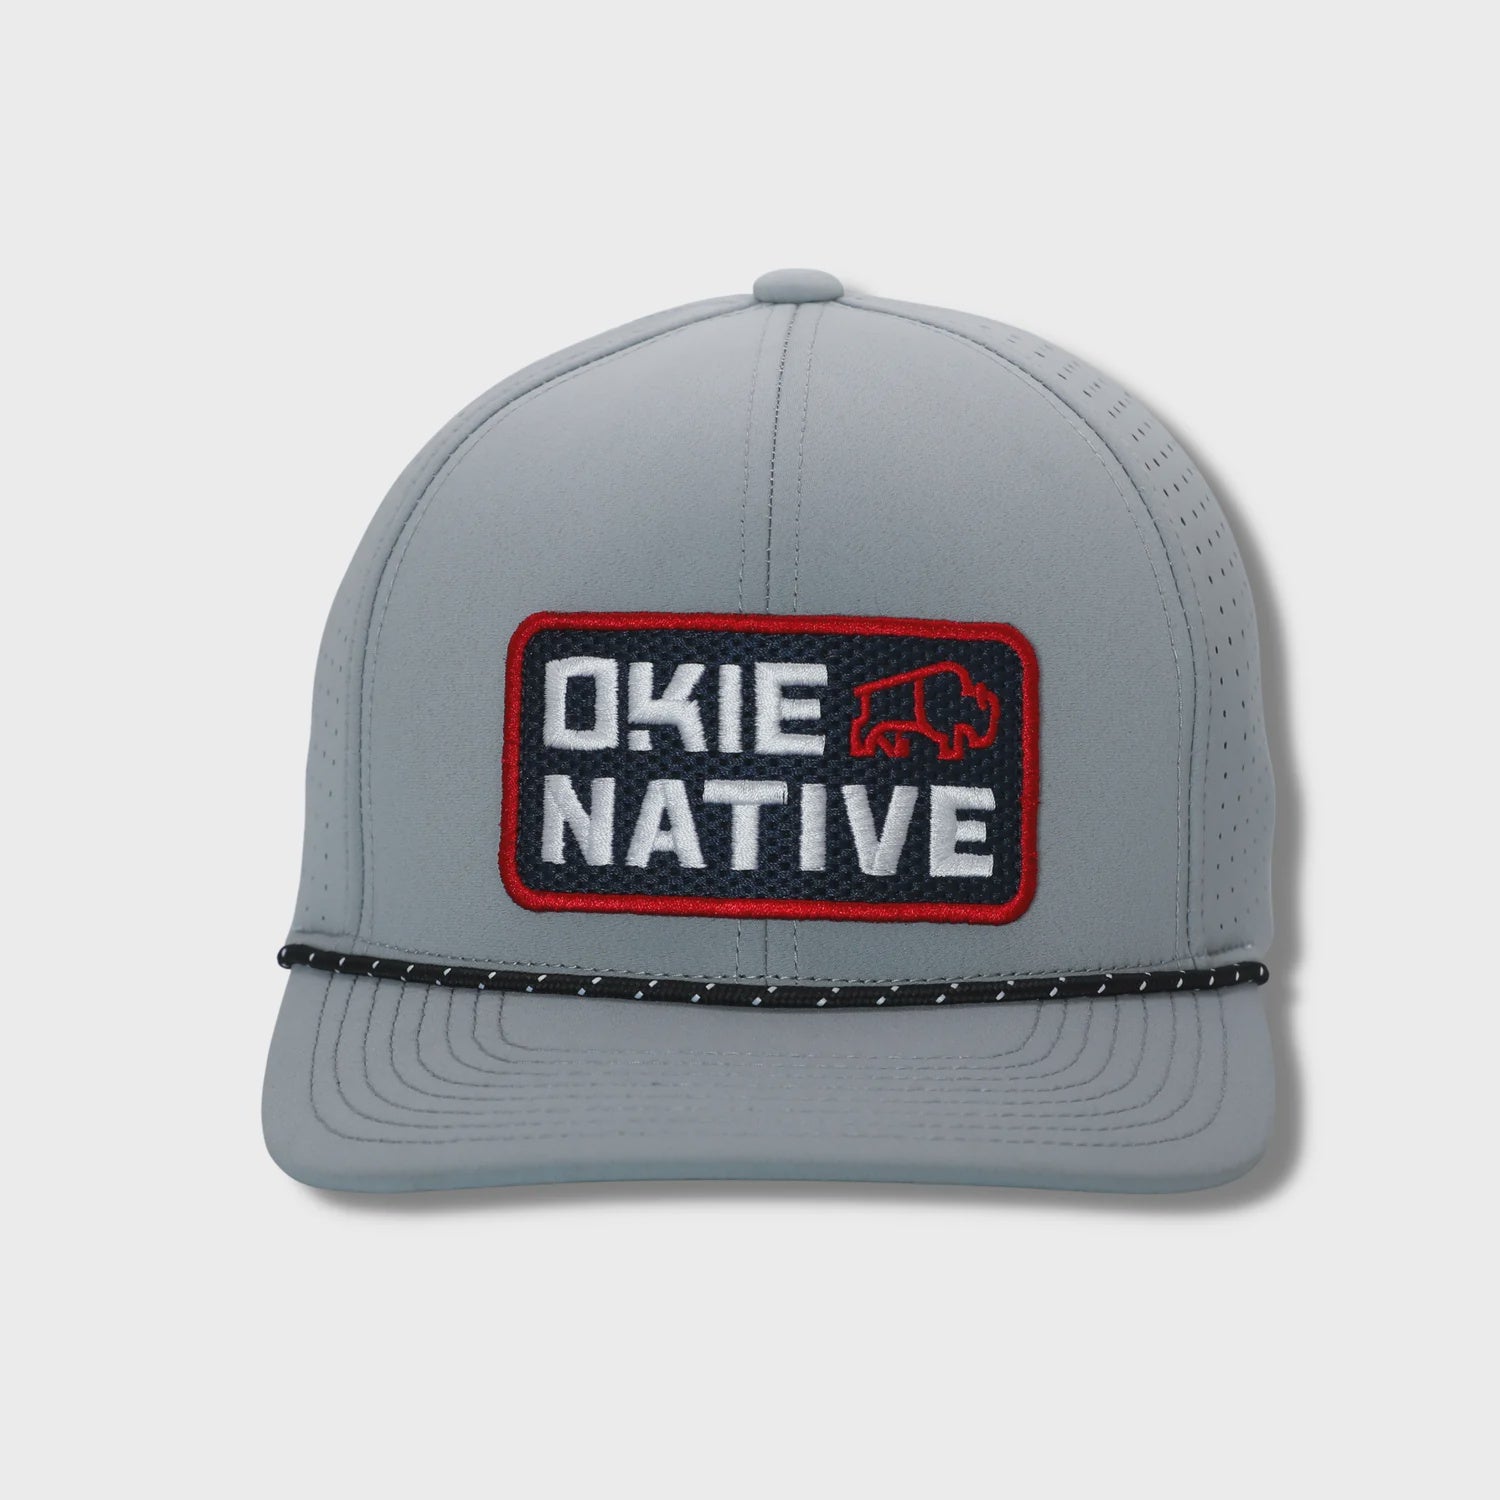 Okie Native-Grey with Blue & Red